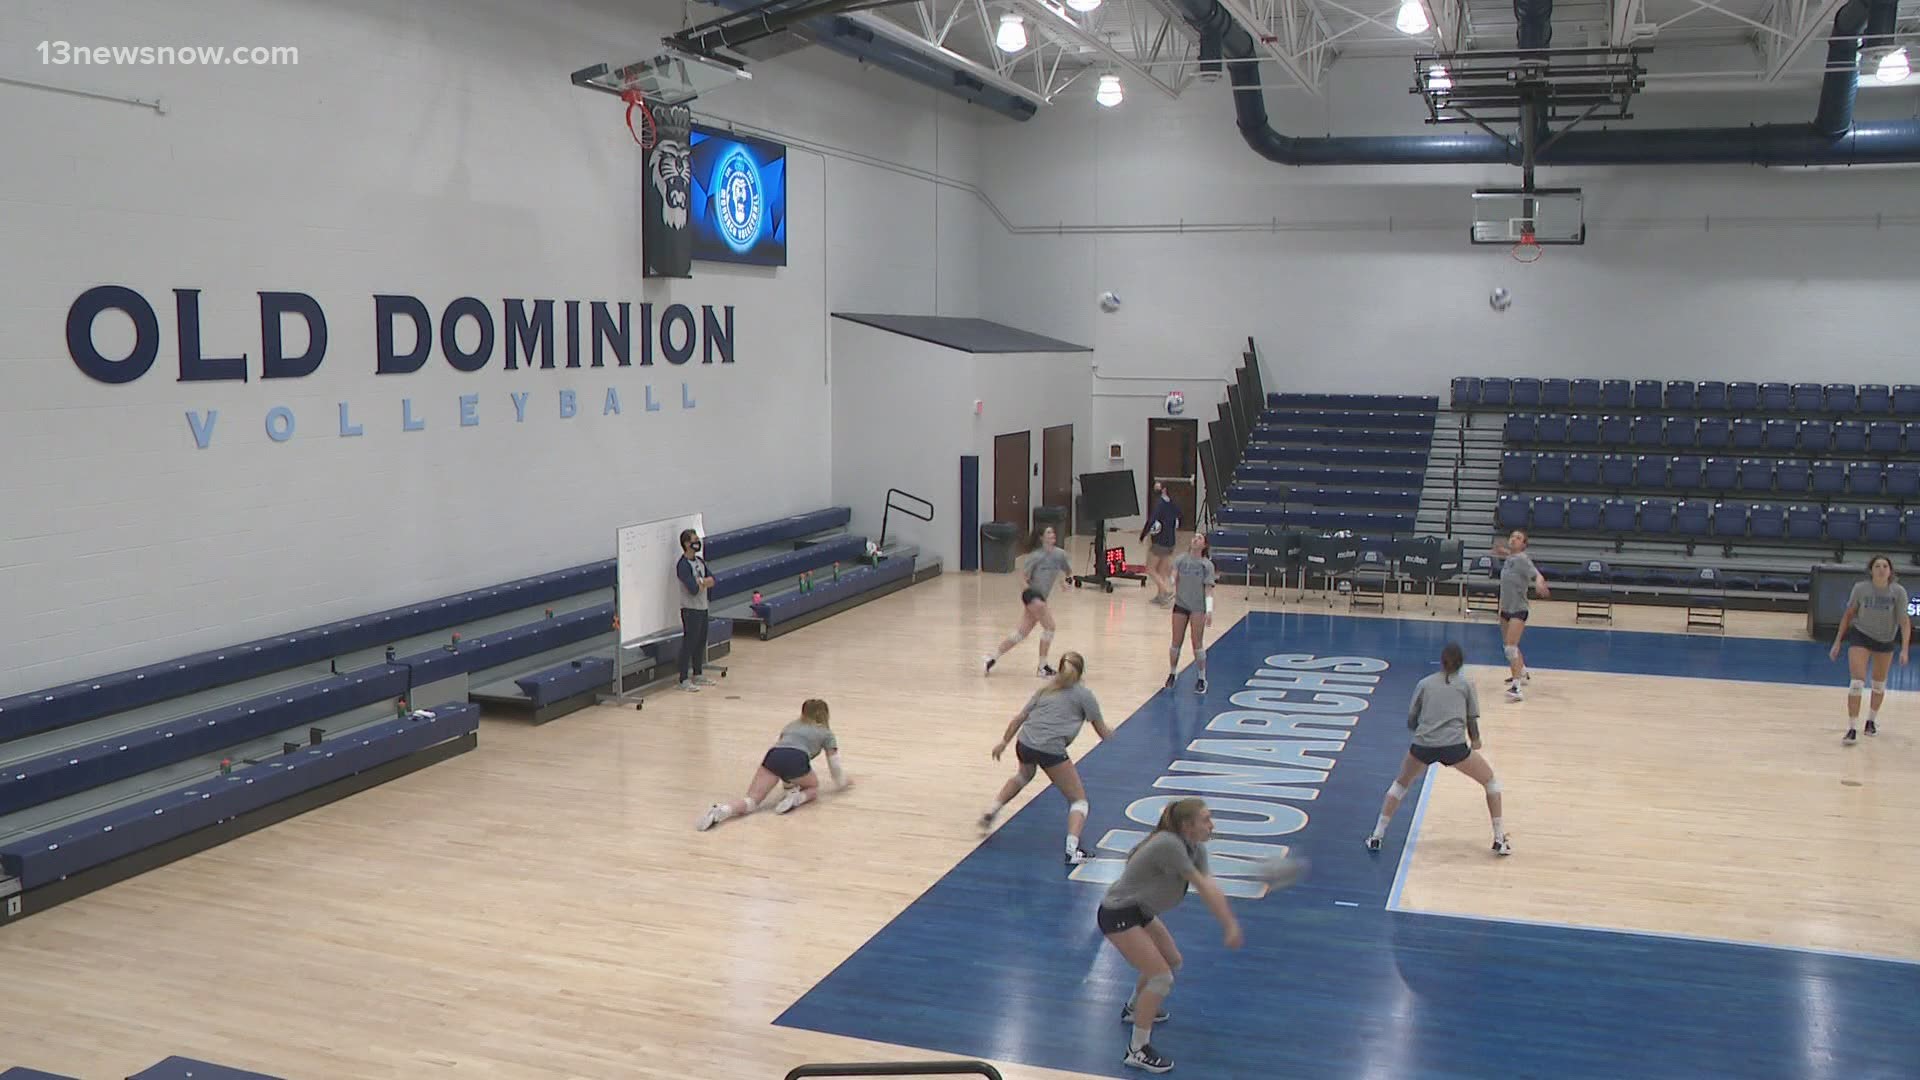 It's been 2 years in the making and the first game for this new sport at ODU is January 22.